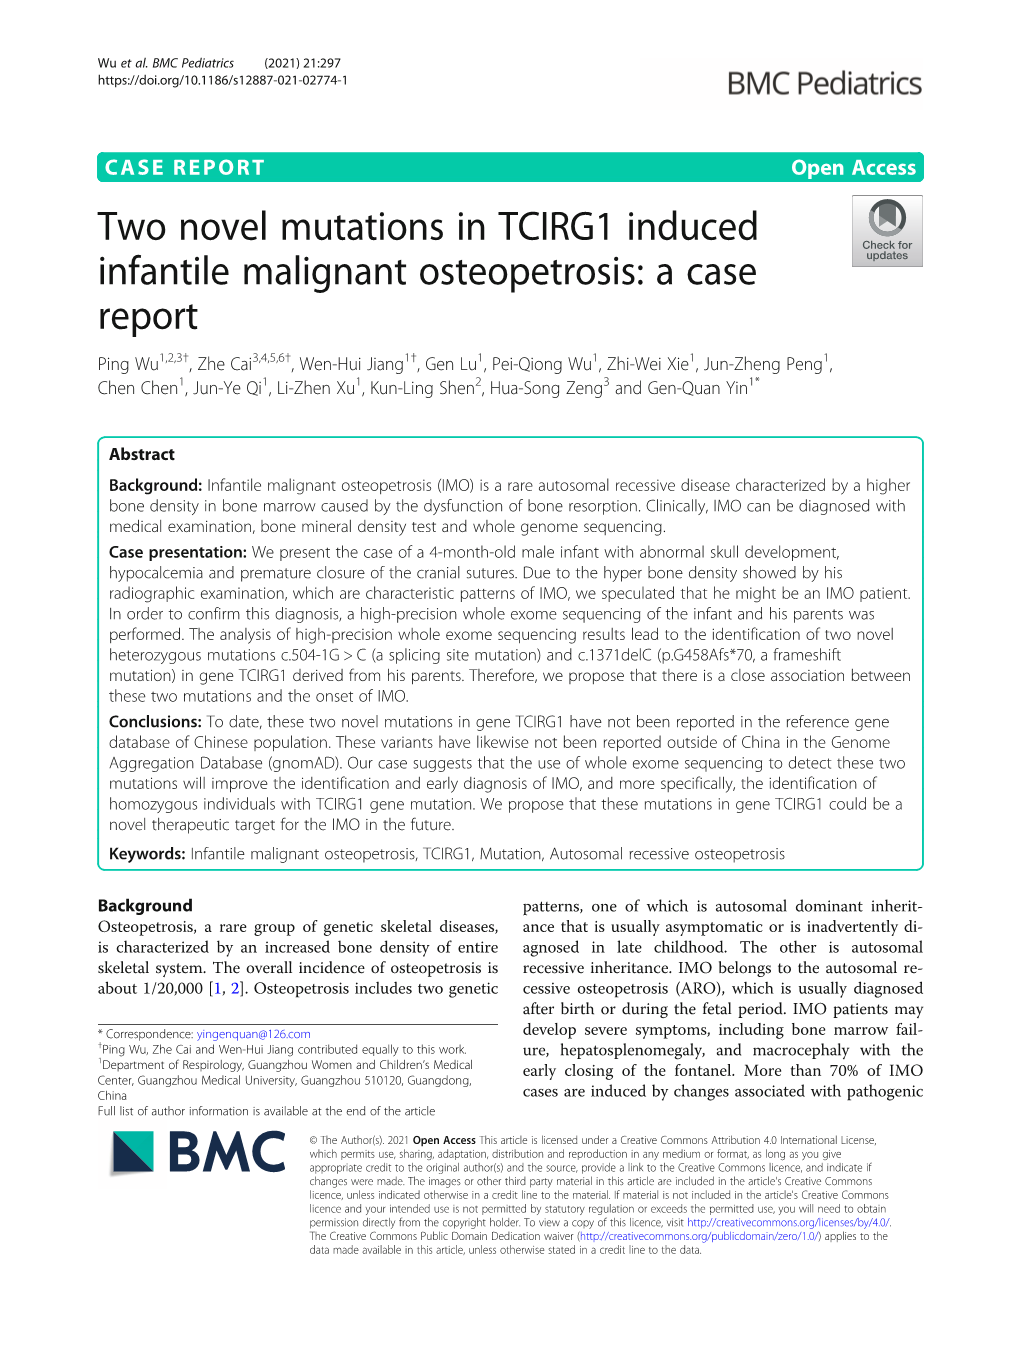 Two Novel Mutations in TCIRG1 Induced Infantile